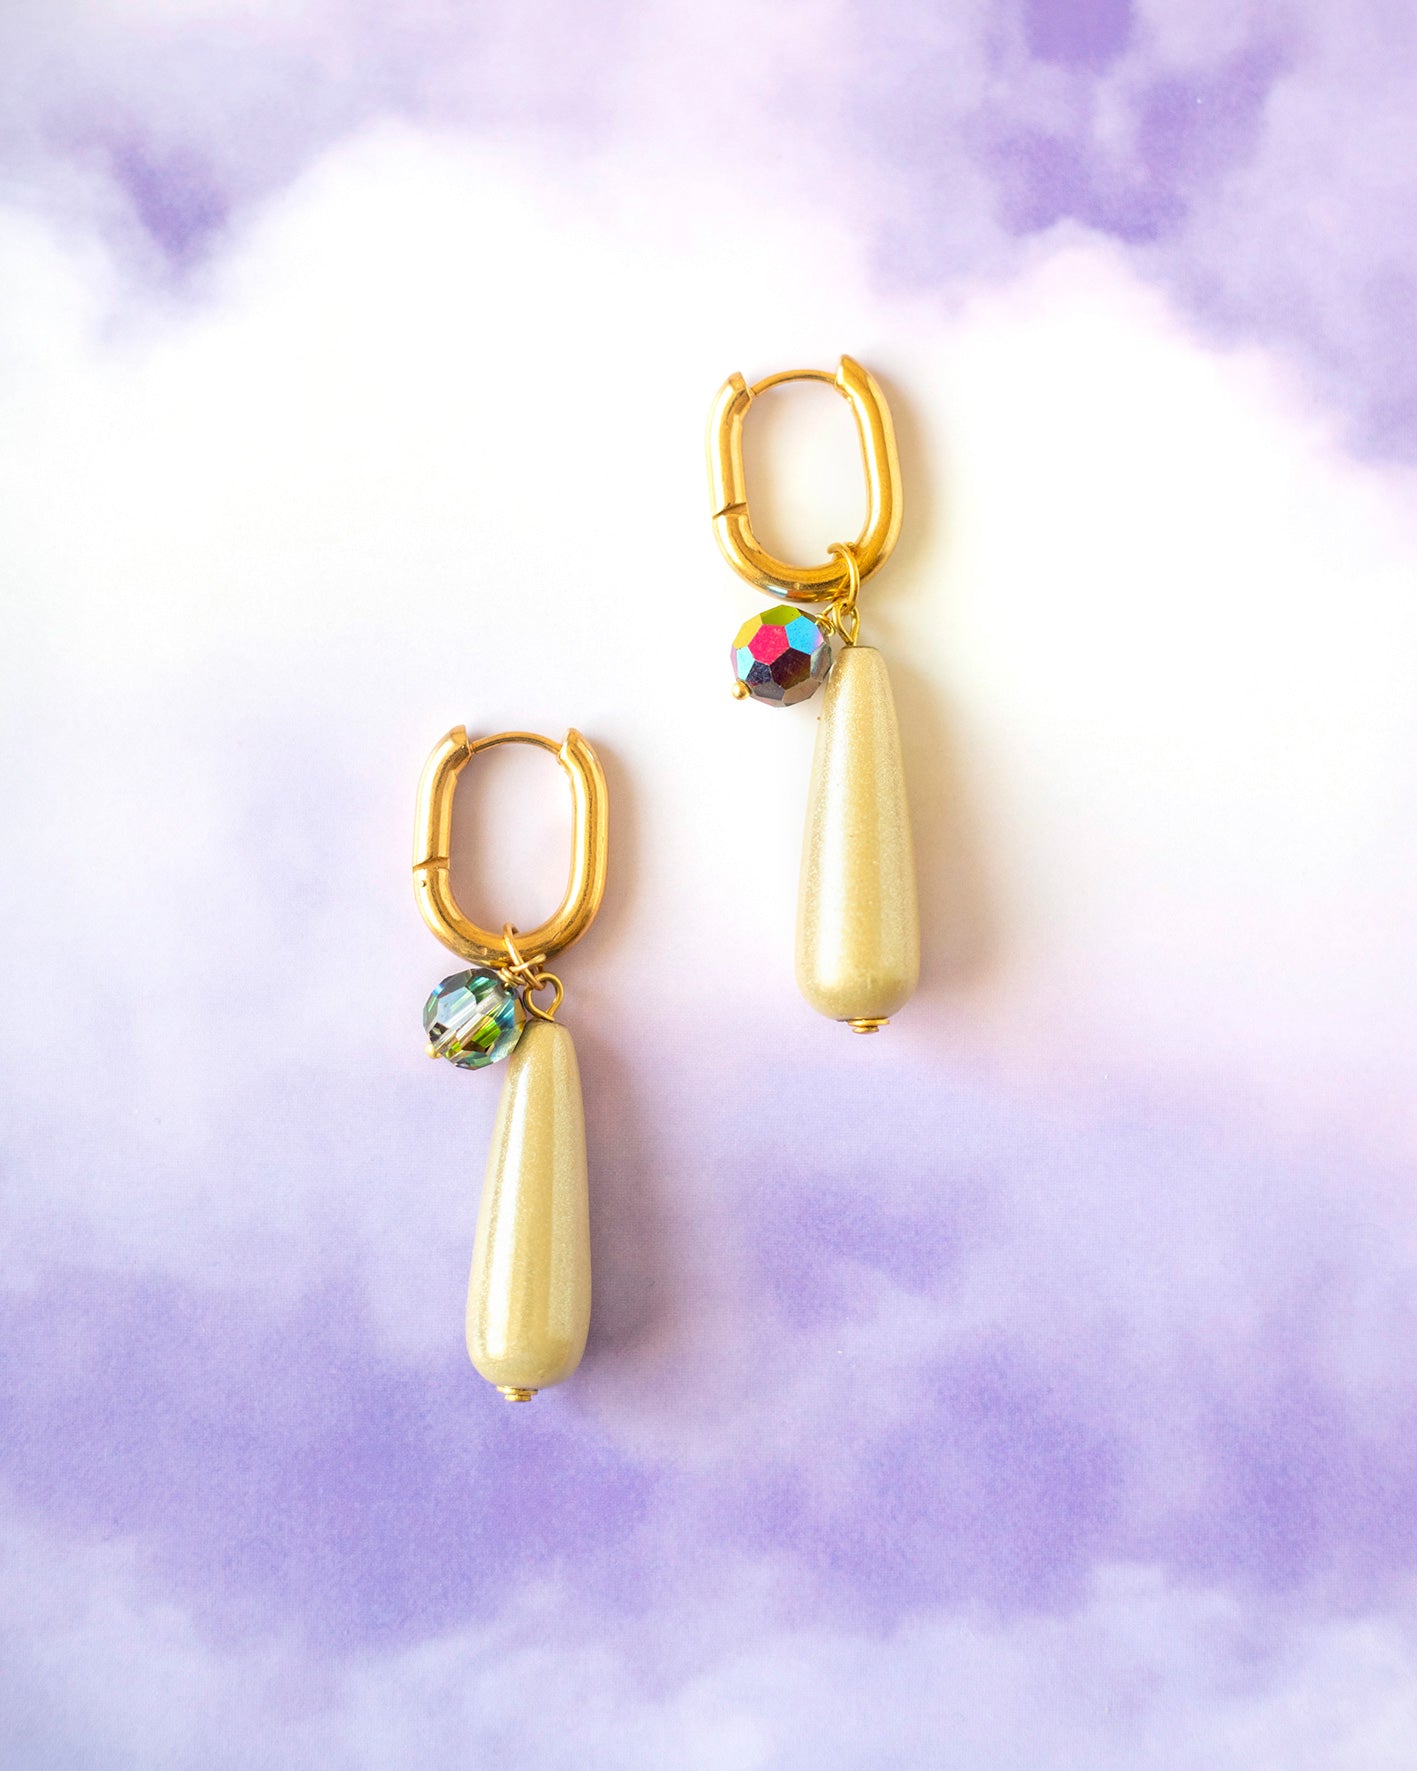 Vintage pearly white glass drop bead earrings